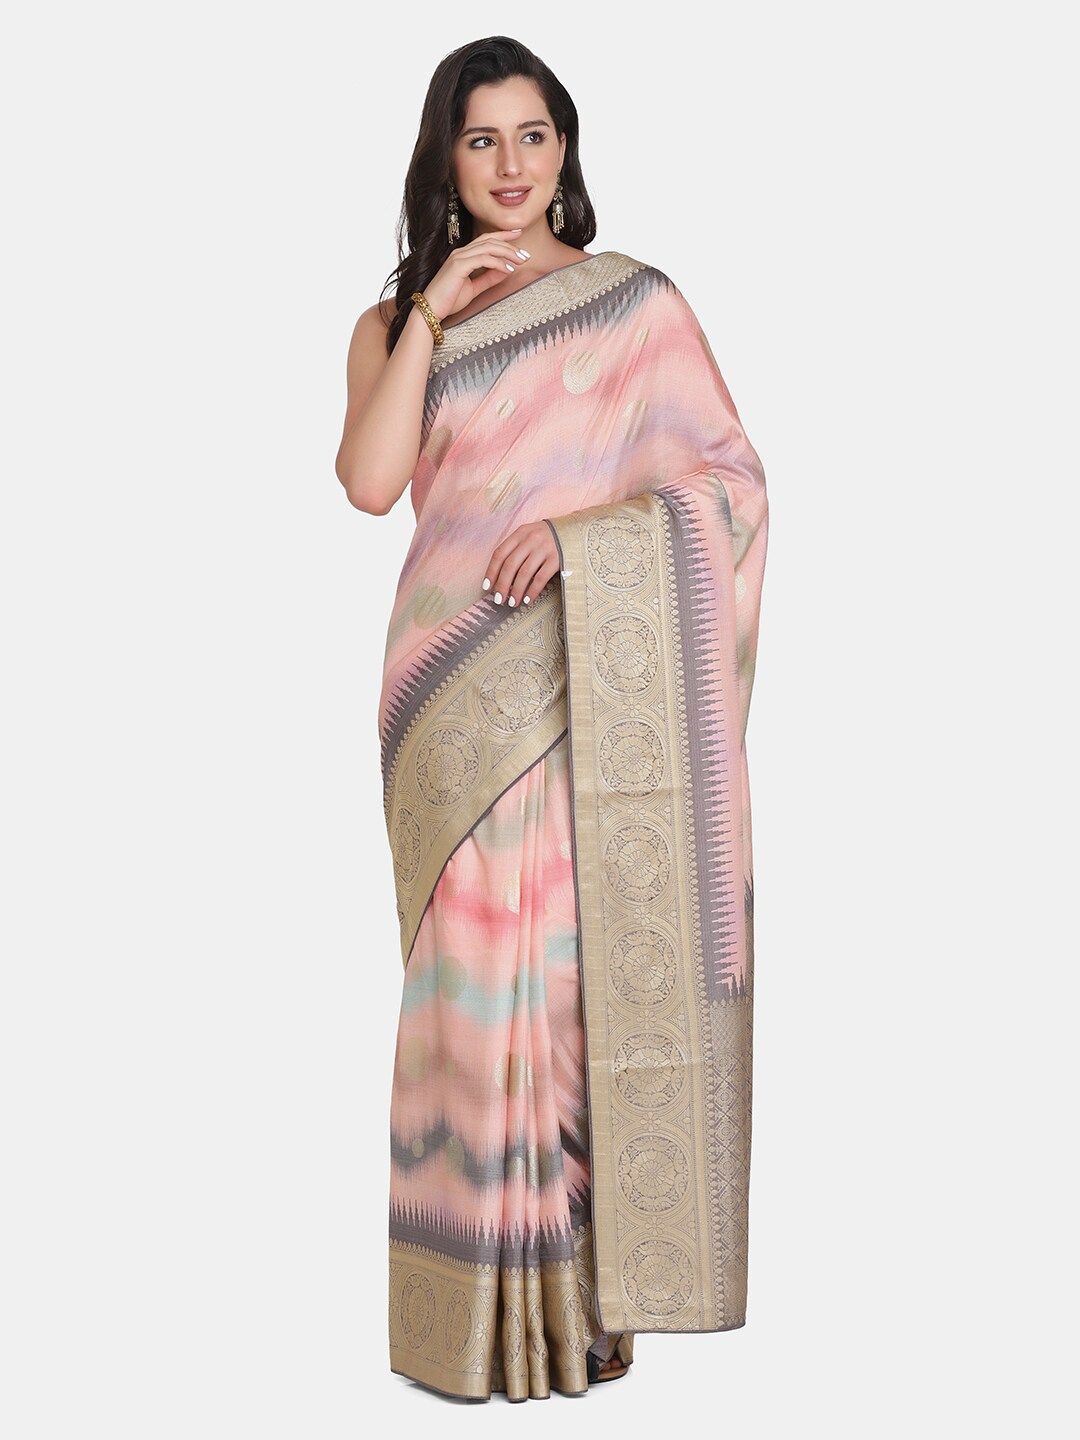 BOMBAY SELECTIONS Grey & Pink Woven Design Silk Blend Tussar Saree Price in India